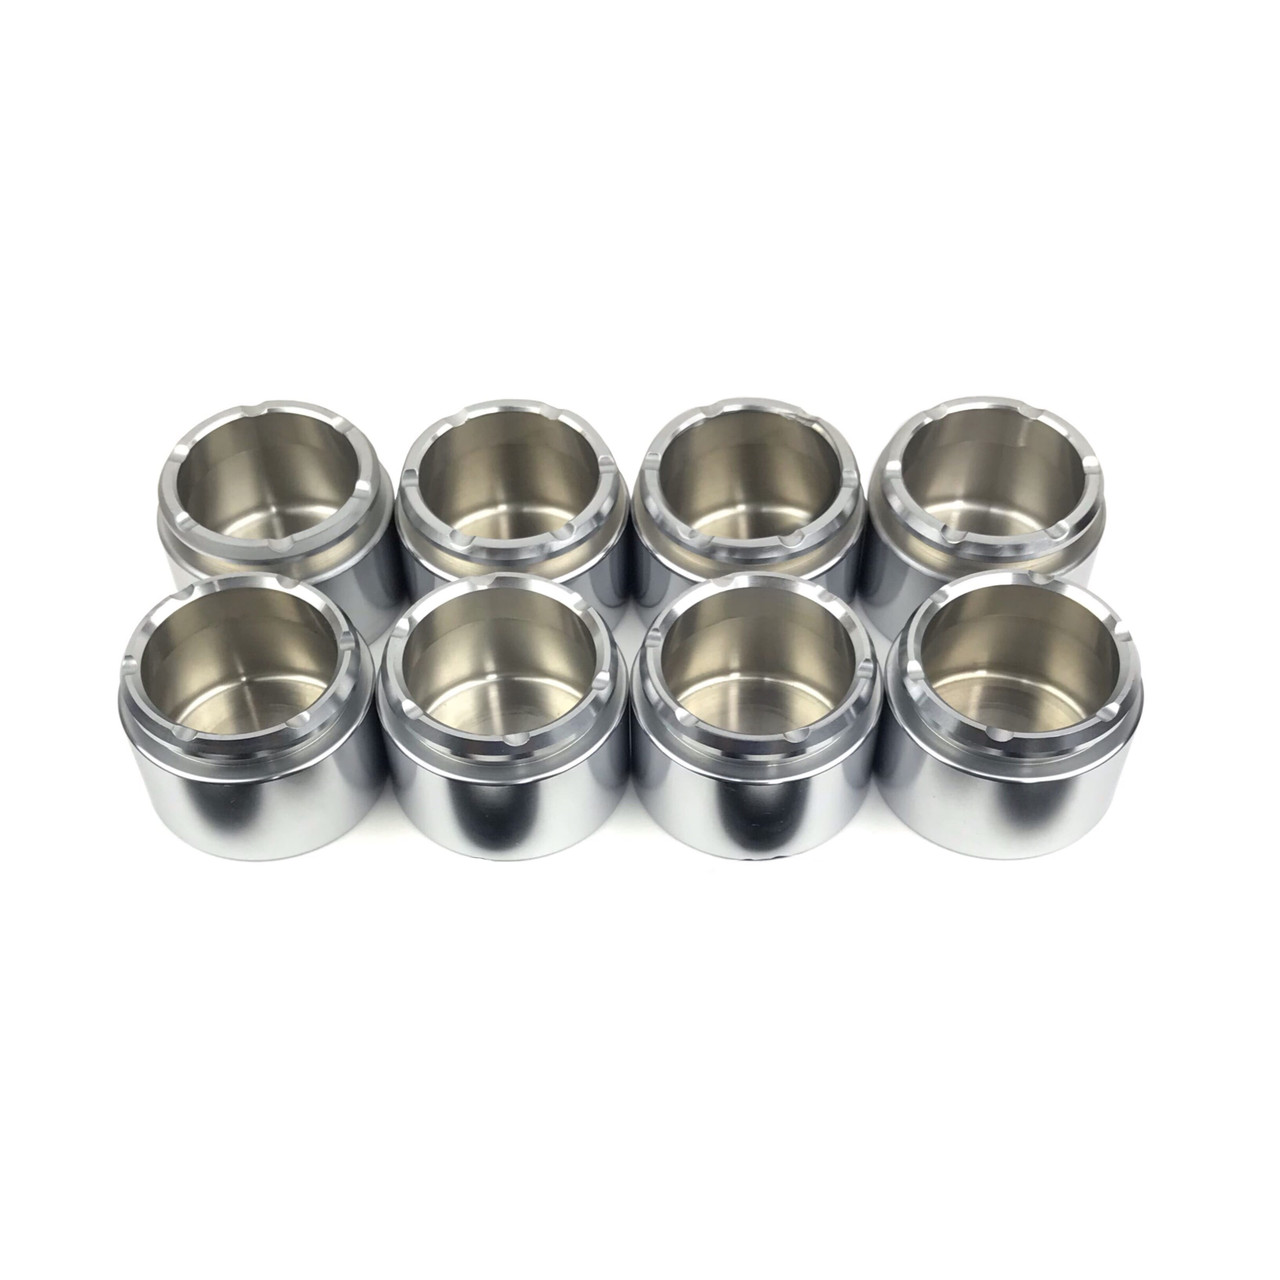 Piston Kit (Stainless Steel) - Tesla M3 & M3P Front 4 Pot Calipers (Price is for 2 Calipers)